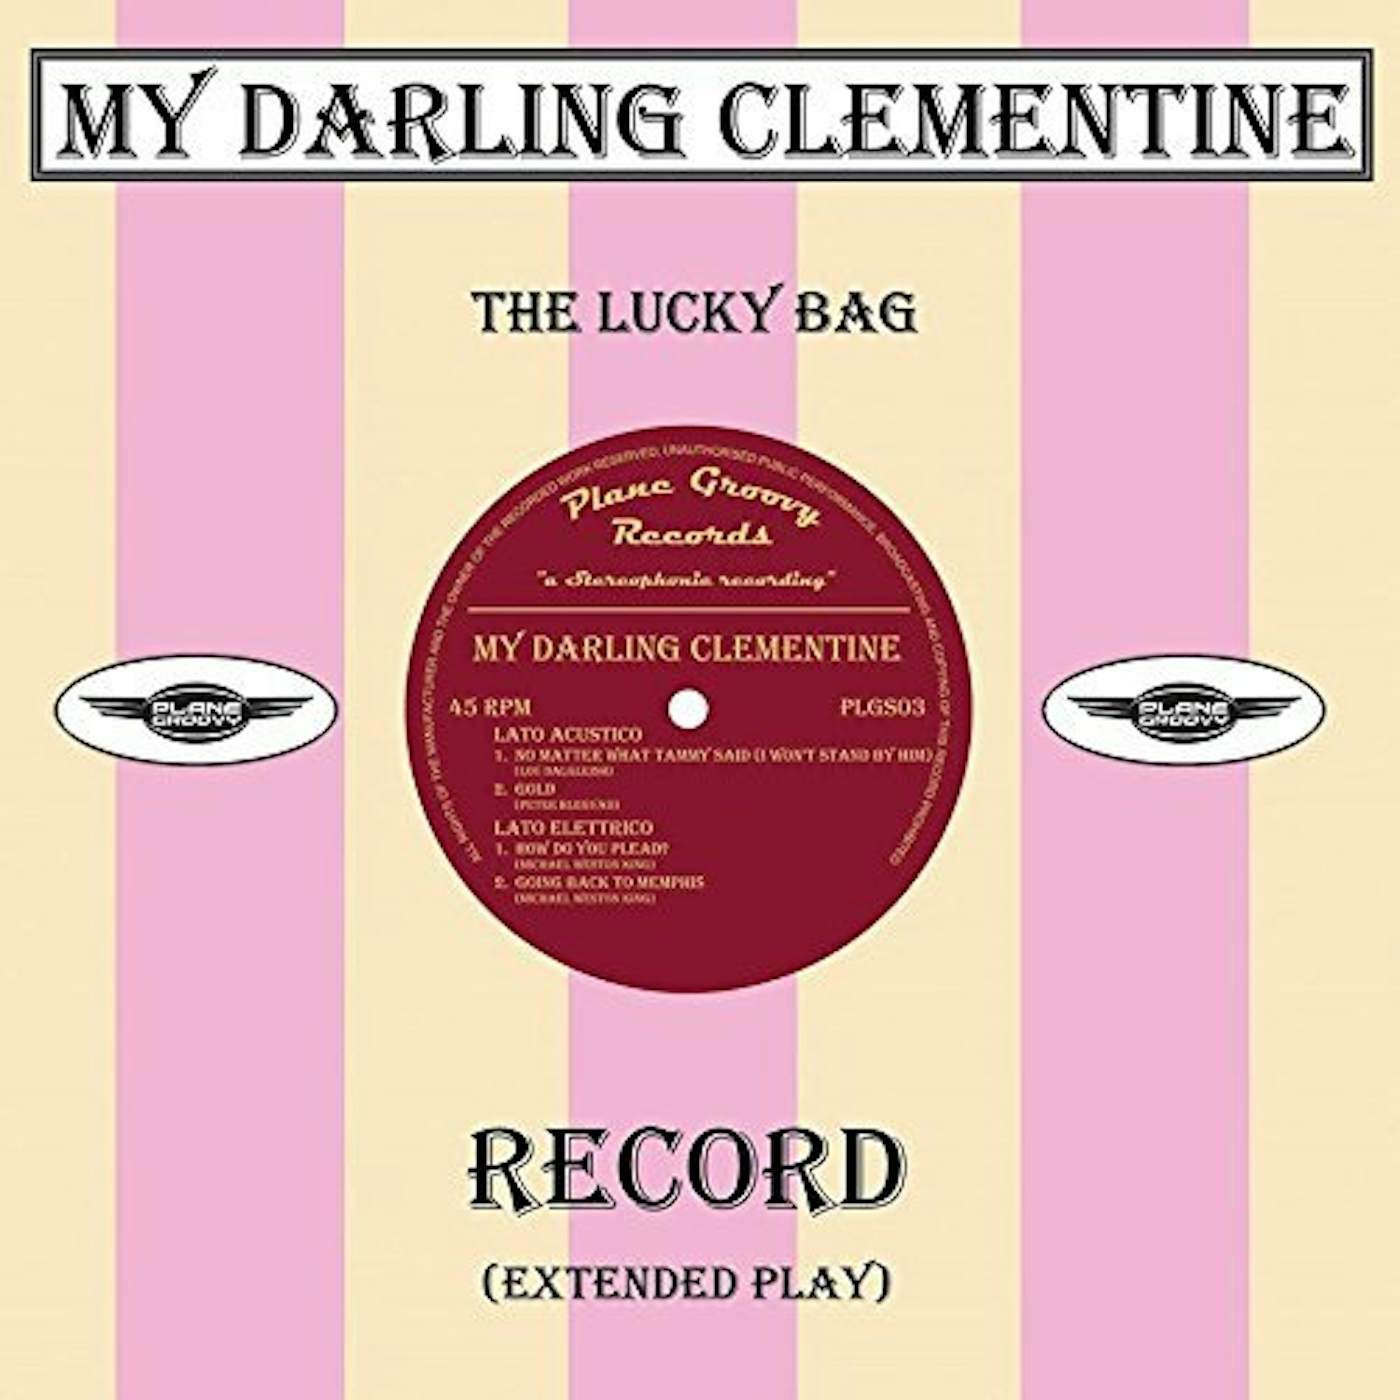 My Darling Clementine LUCKY BAG Vinyl Record